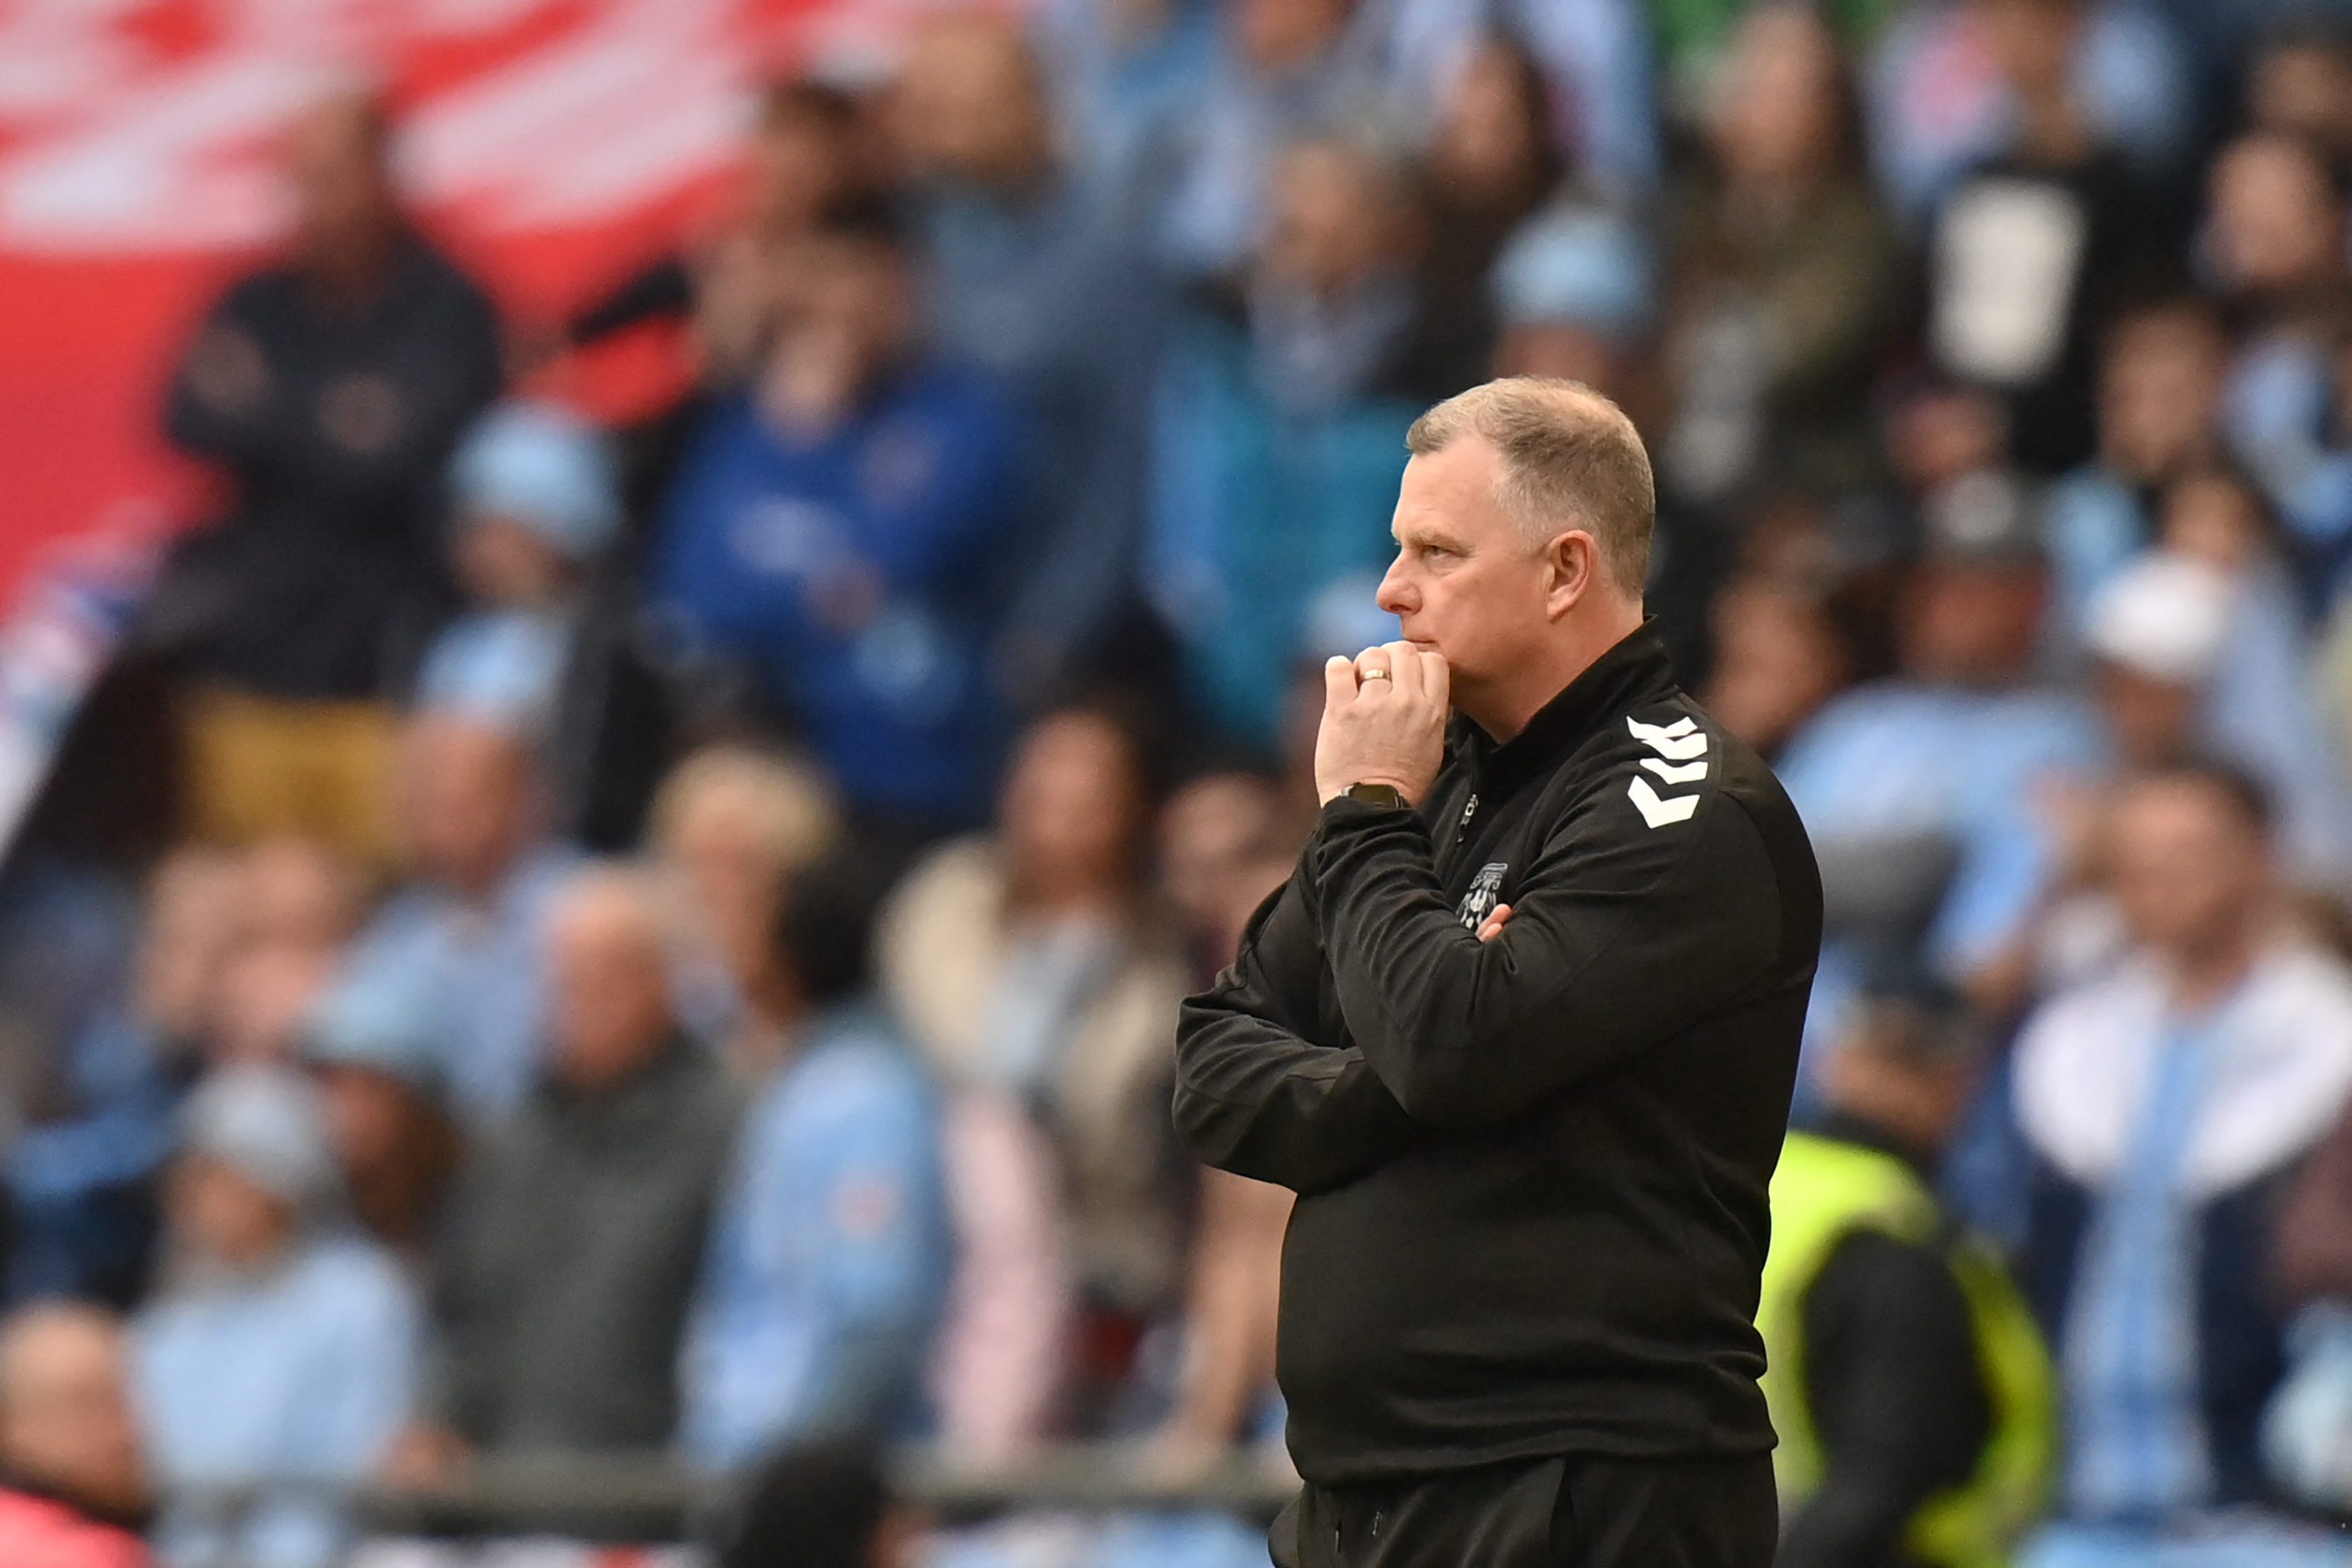 Coventry striker "should have cut his toenails" Mark Robins jokes after gutwrenching offside call against Manchester United.